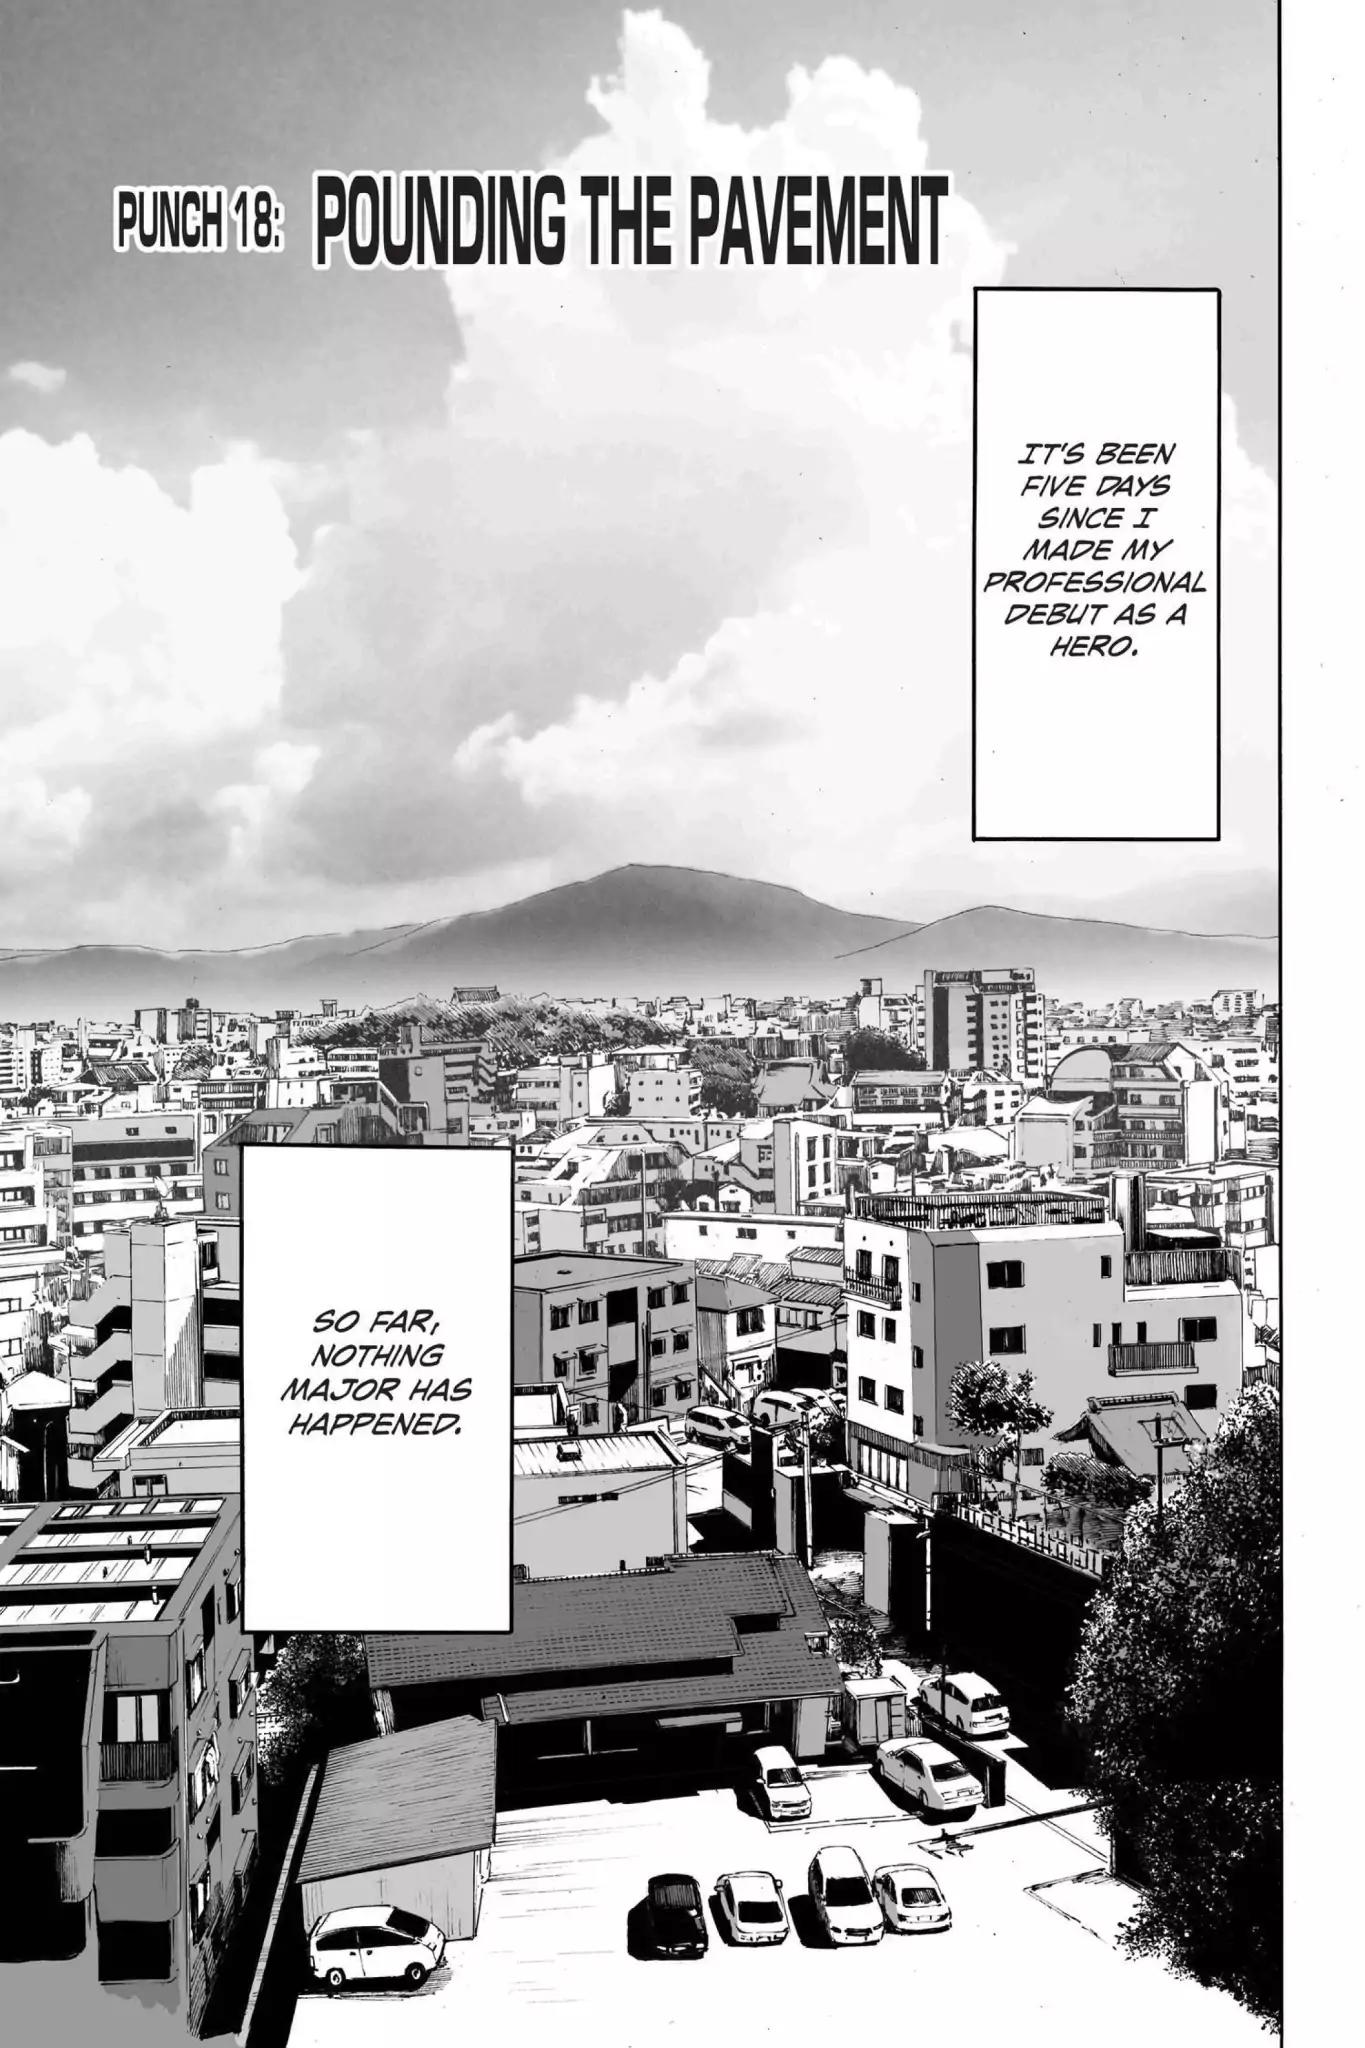 One Punch Man, Chapter 18 Pounding The Pavement image 01